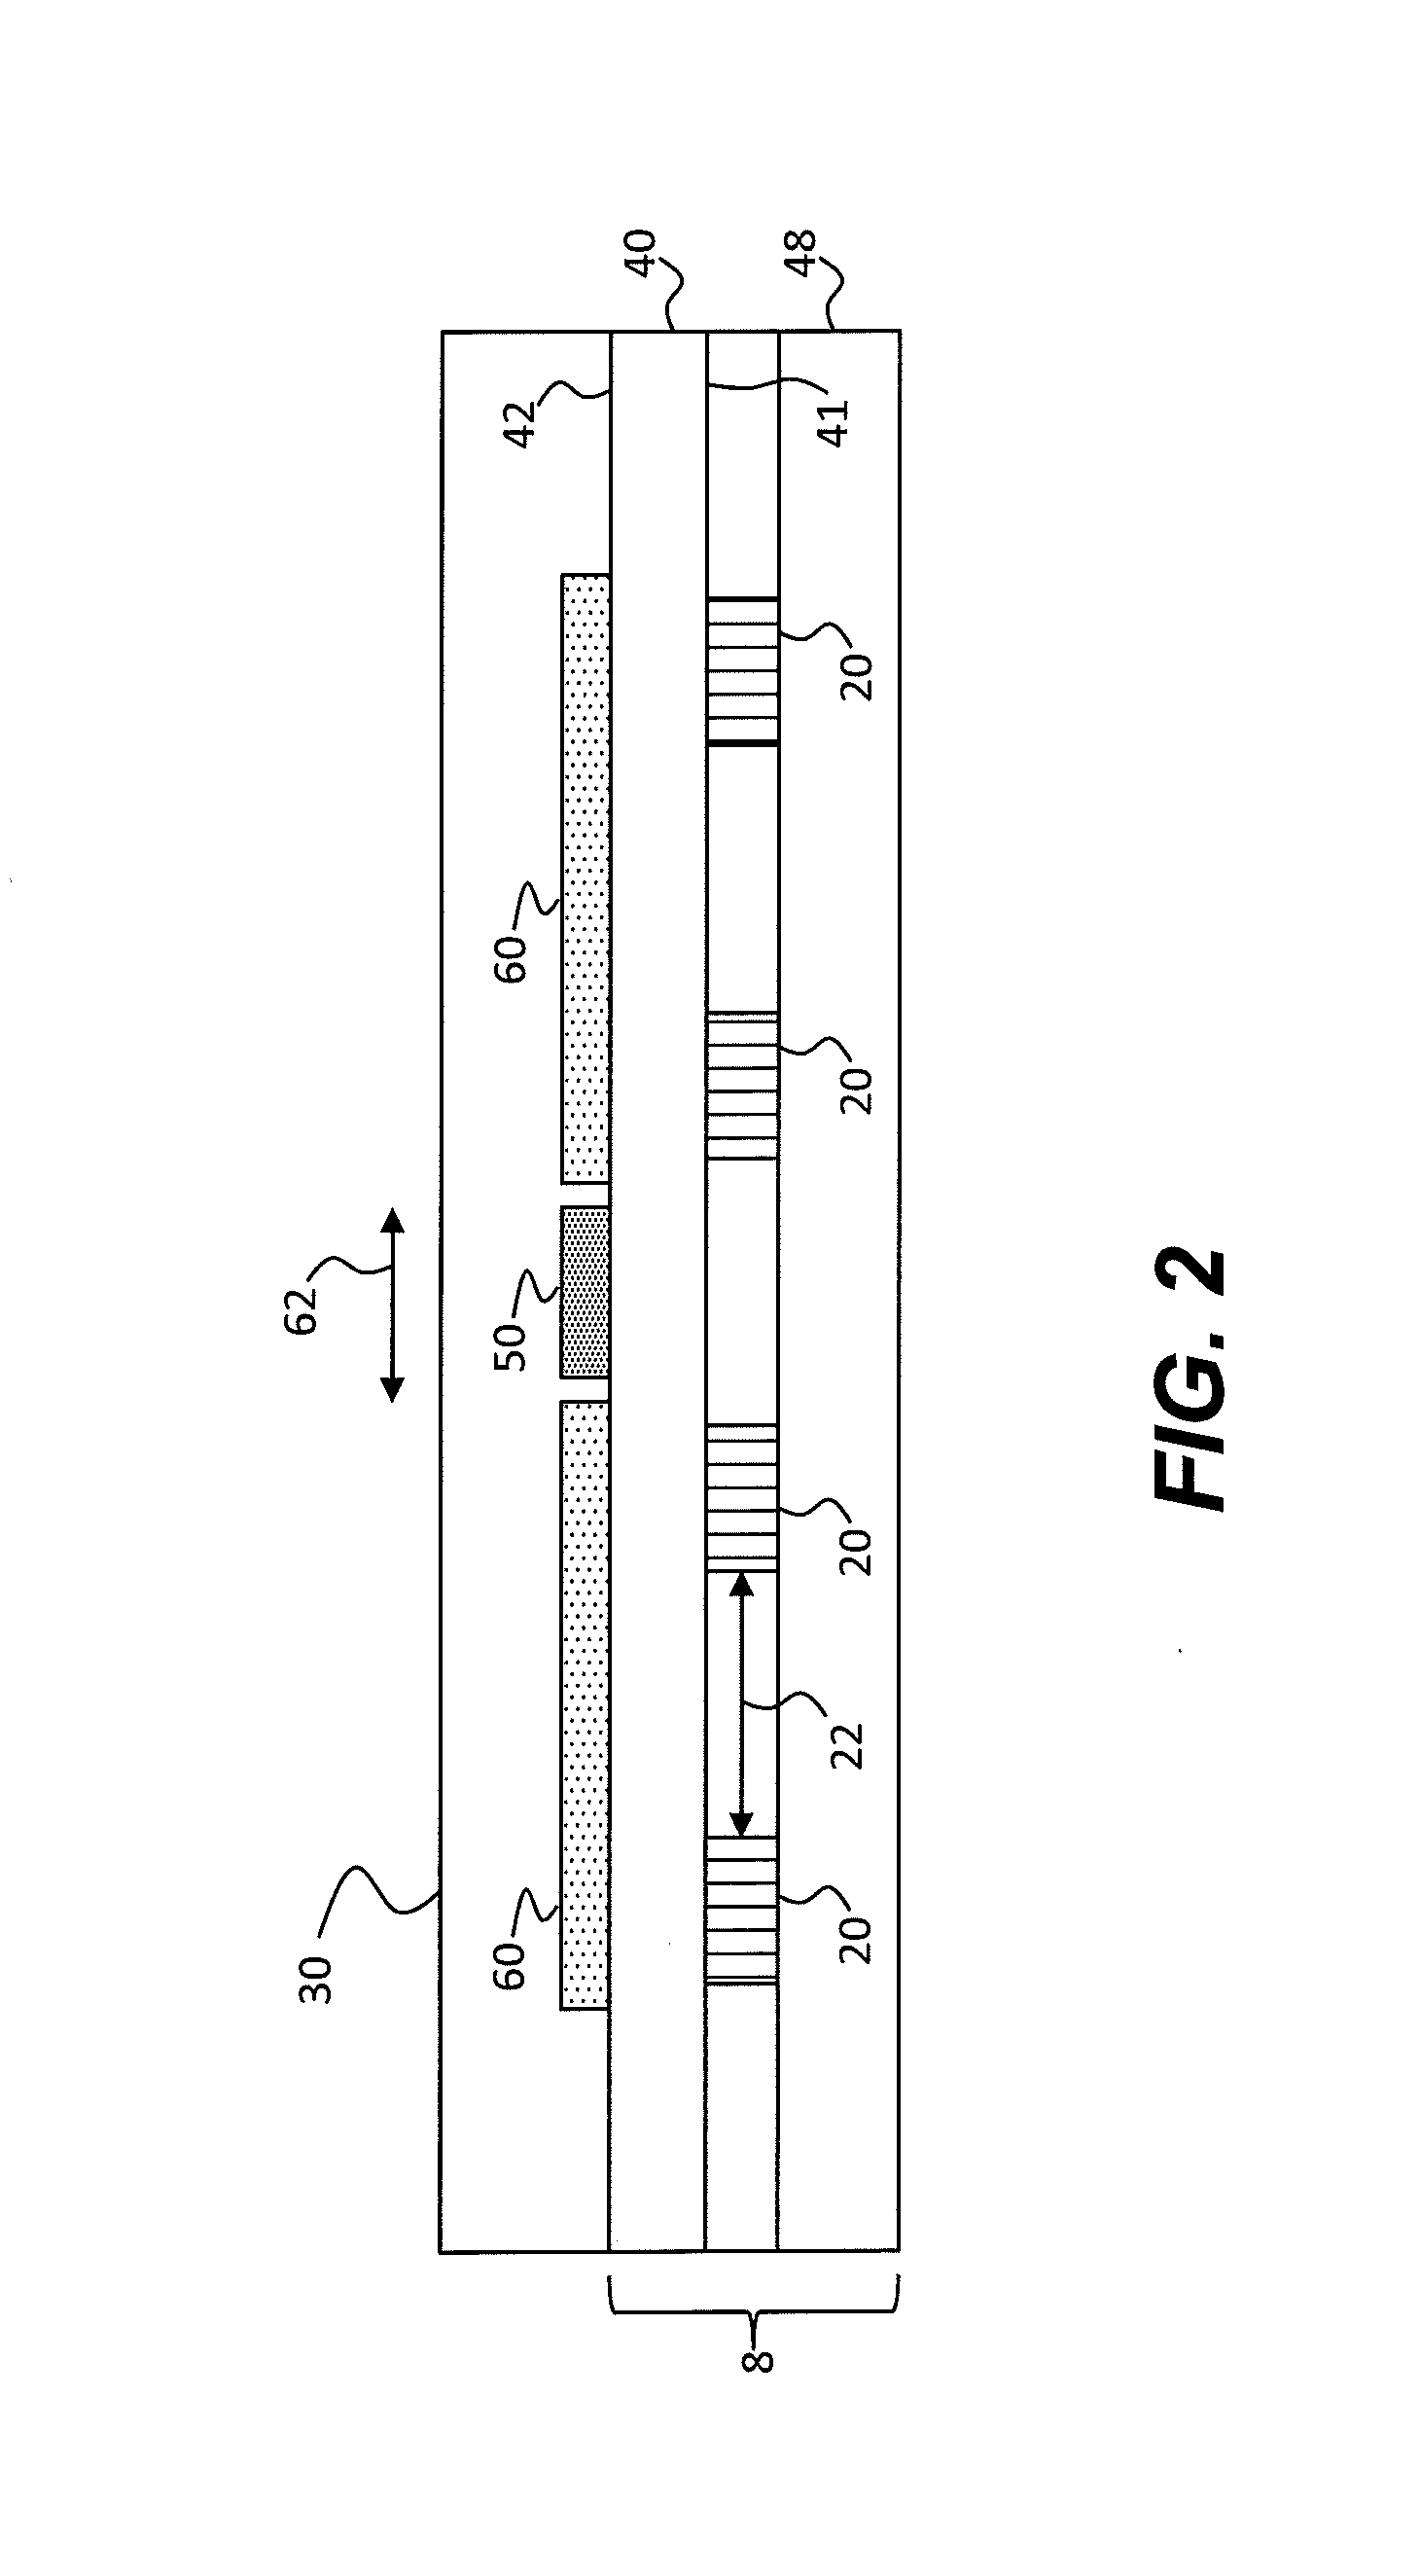 Display apparatus with pixel-aligned ground micro-wire